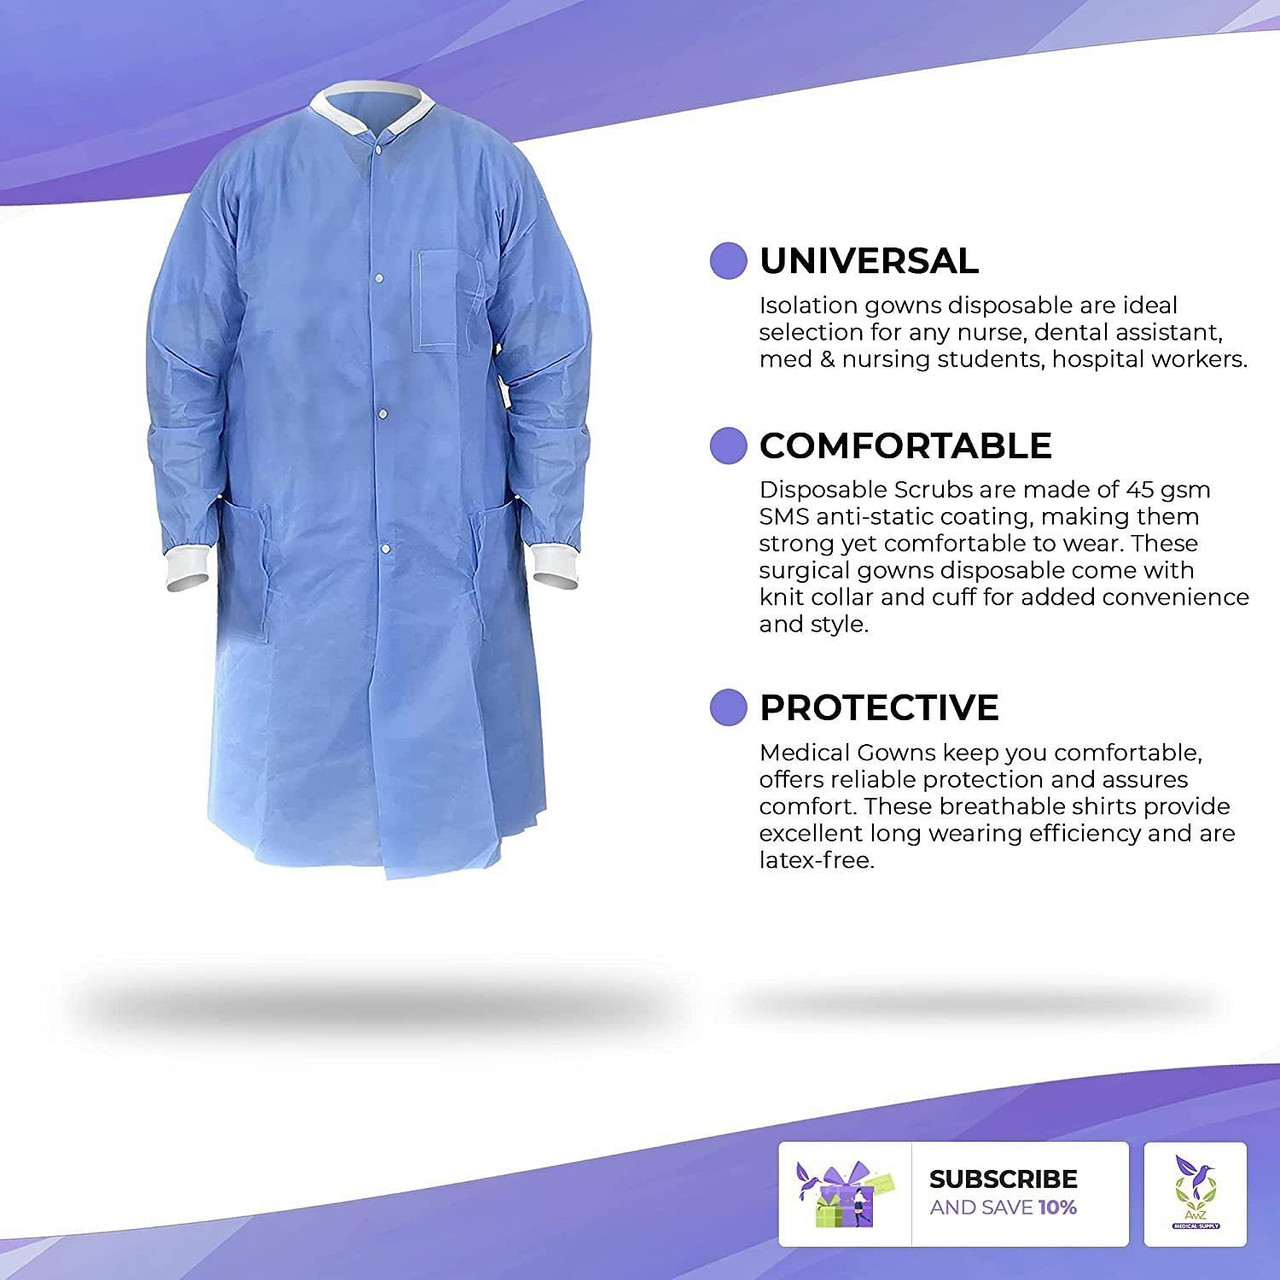 Disposable Lab Coat. Pack of 10 Blue Disposable Gowns Medium. 40 gsm SMS Surgical Gowns with Knit W